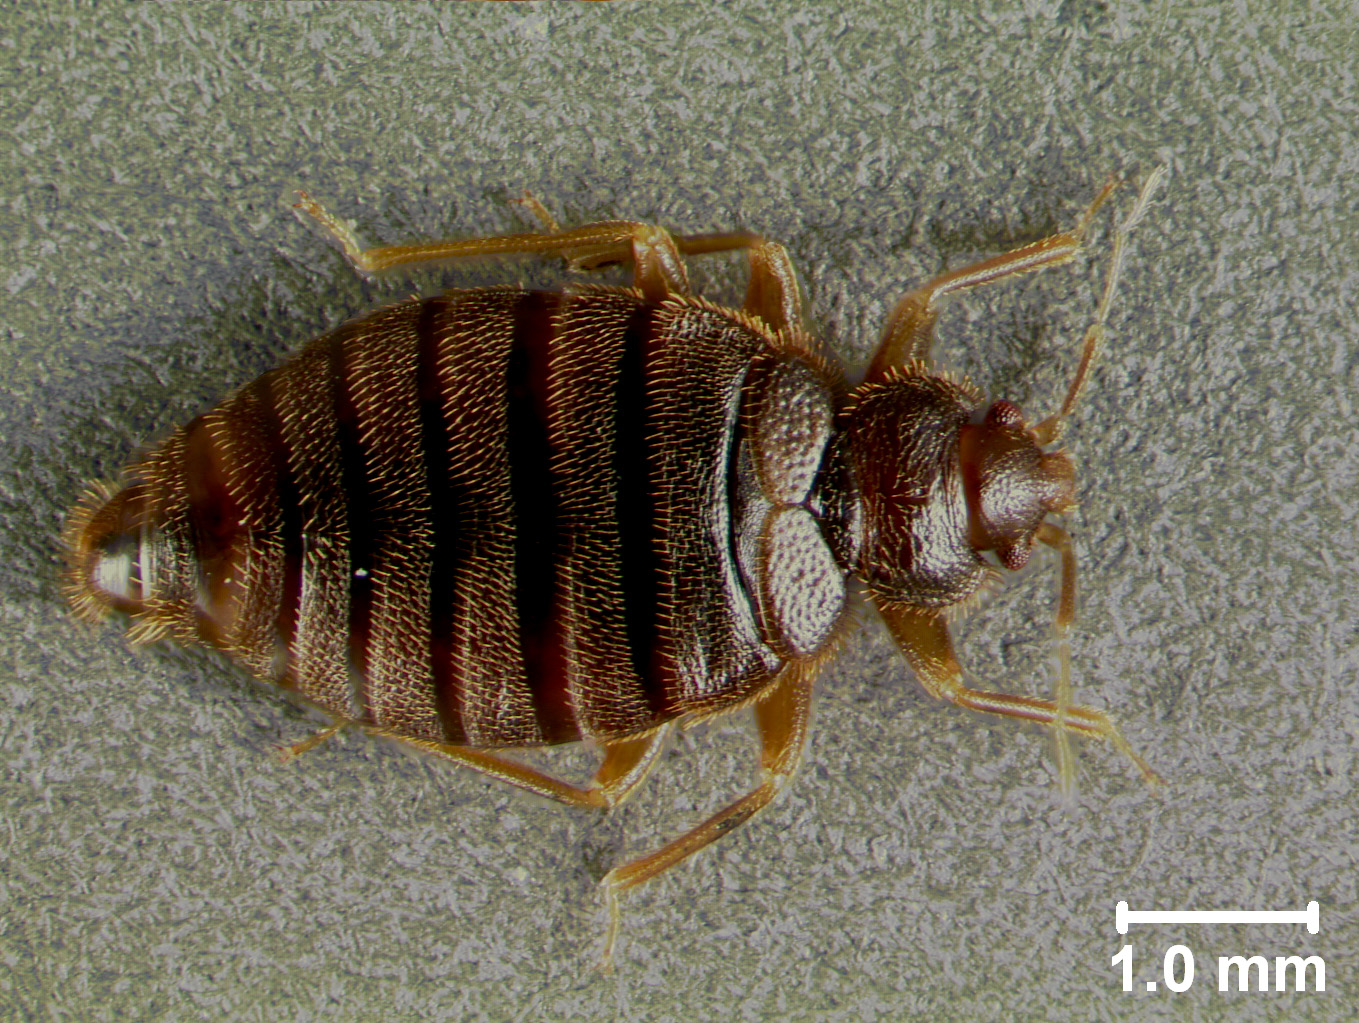 tropical-bed-bug-110916